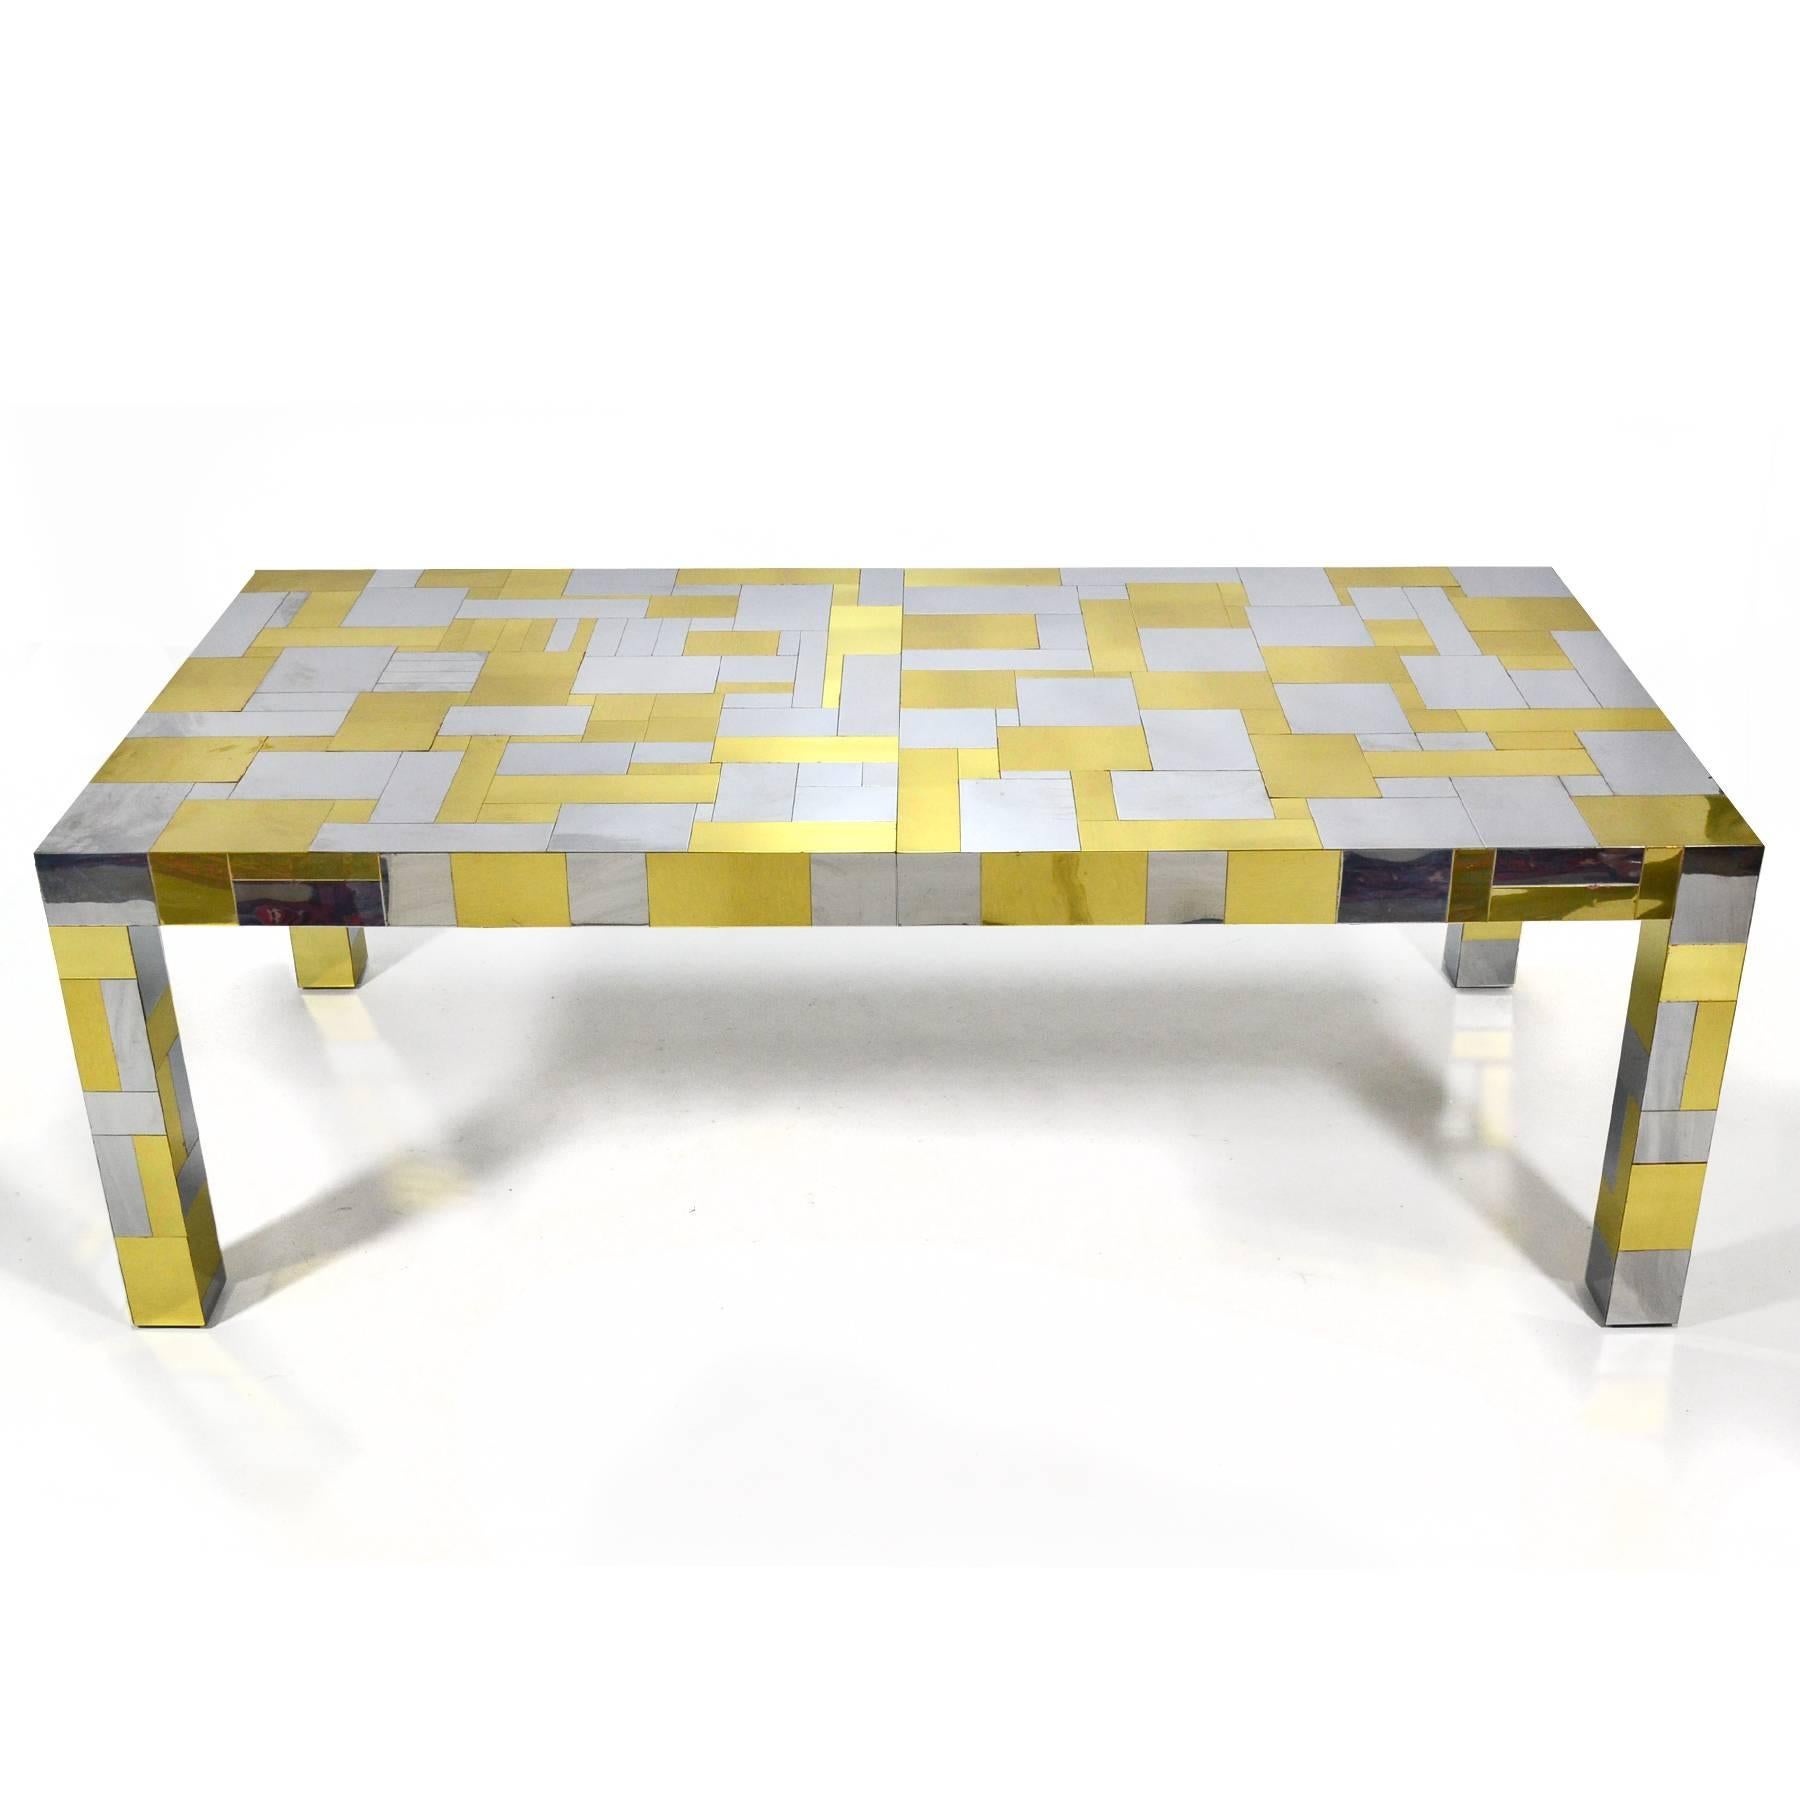 Plated Paul Evans Cityscape Dining Table